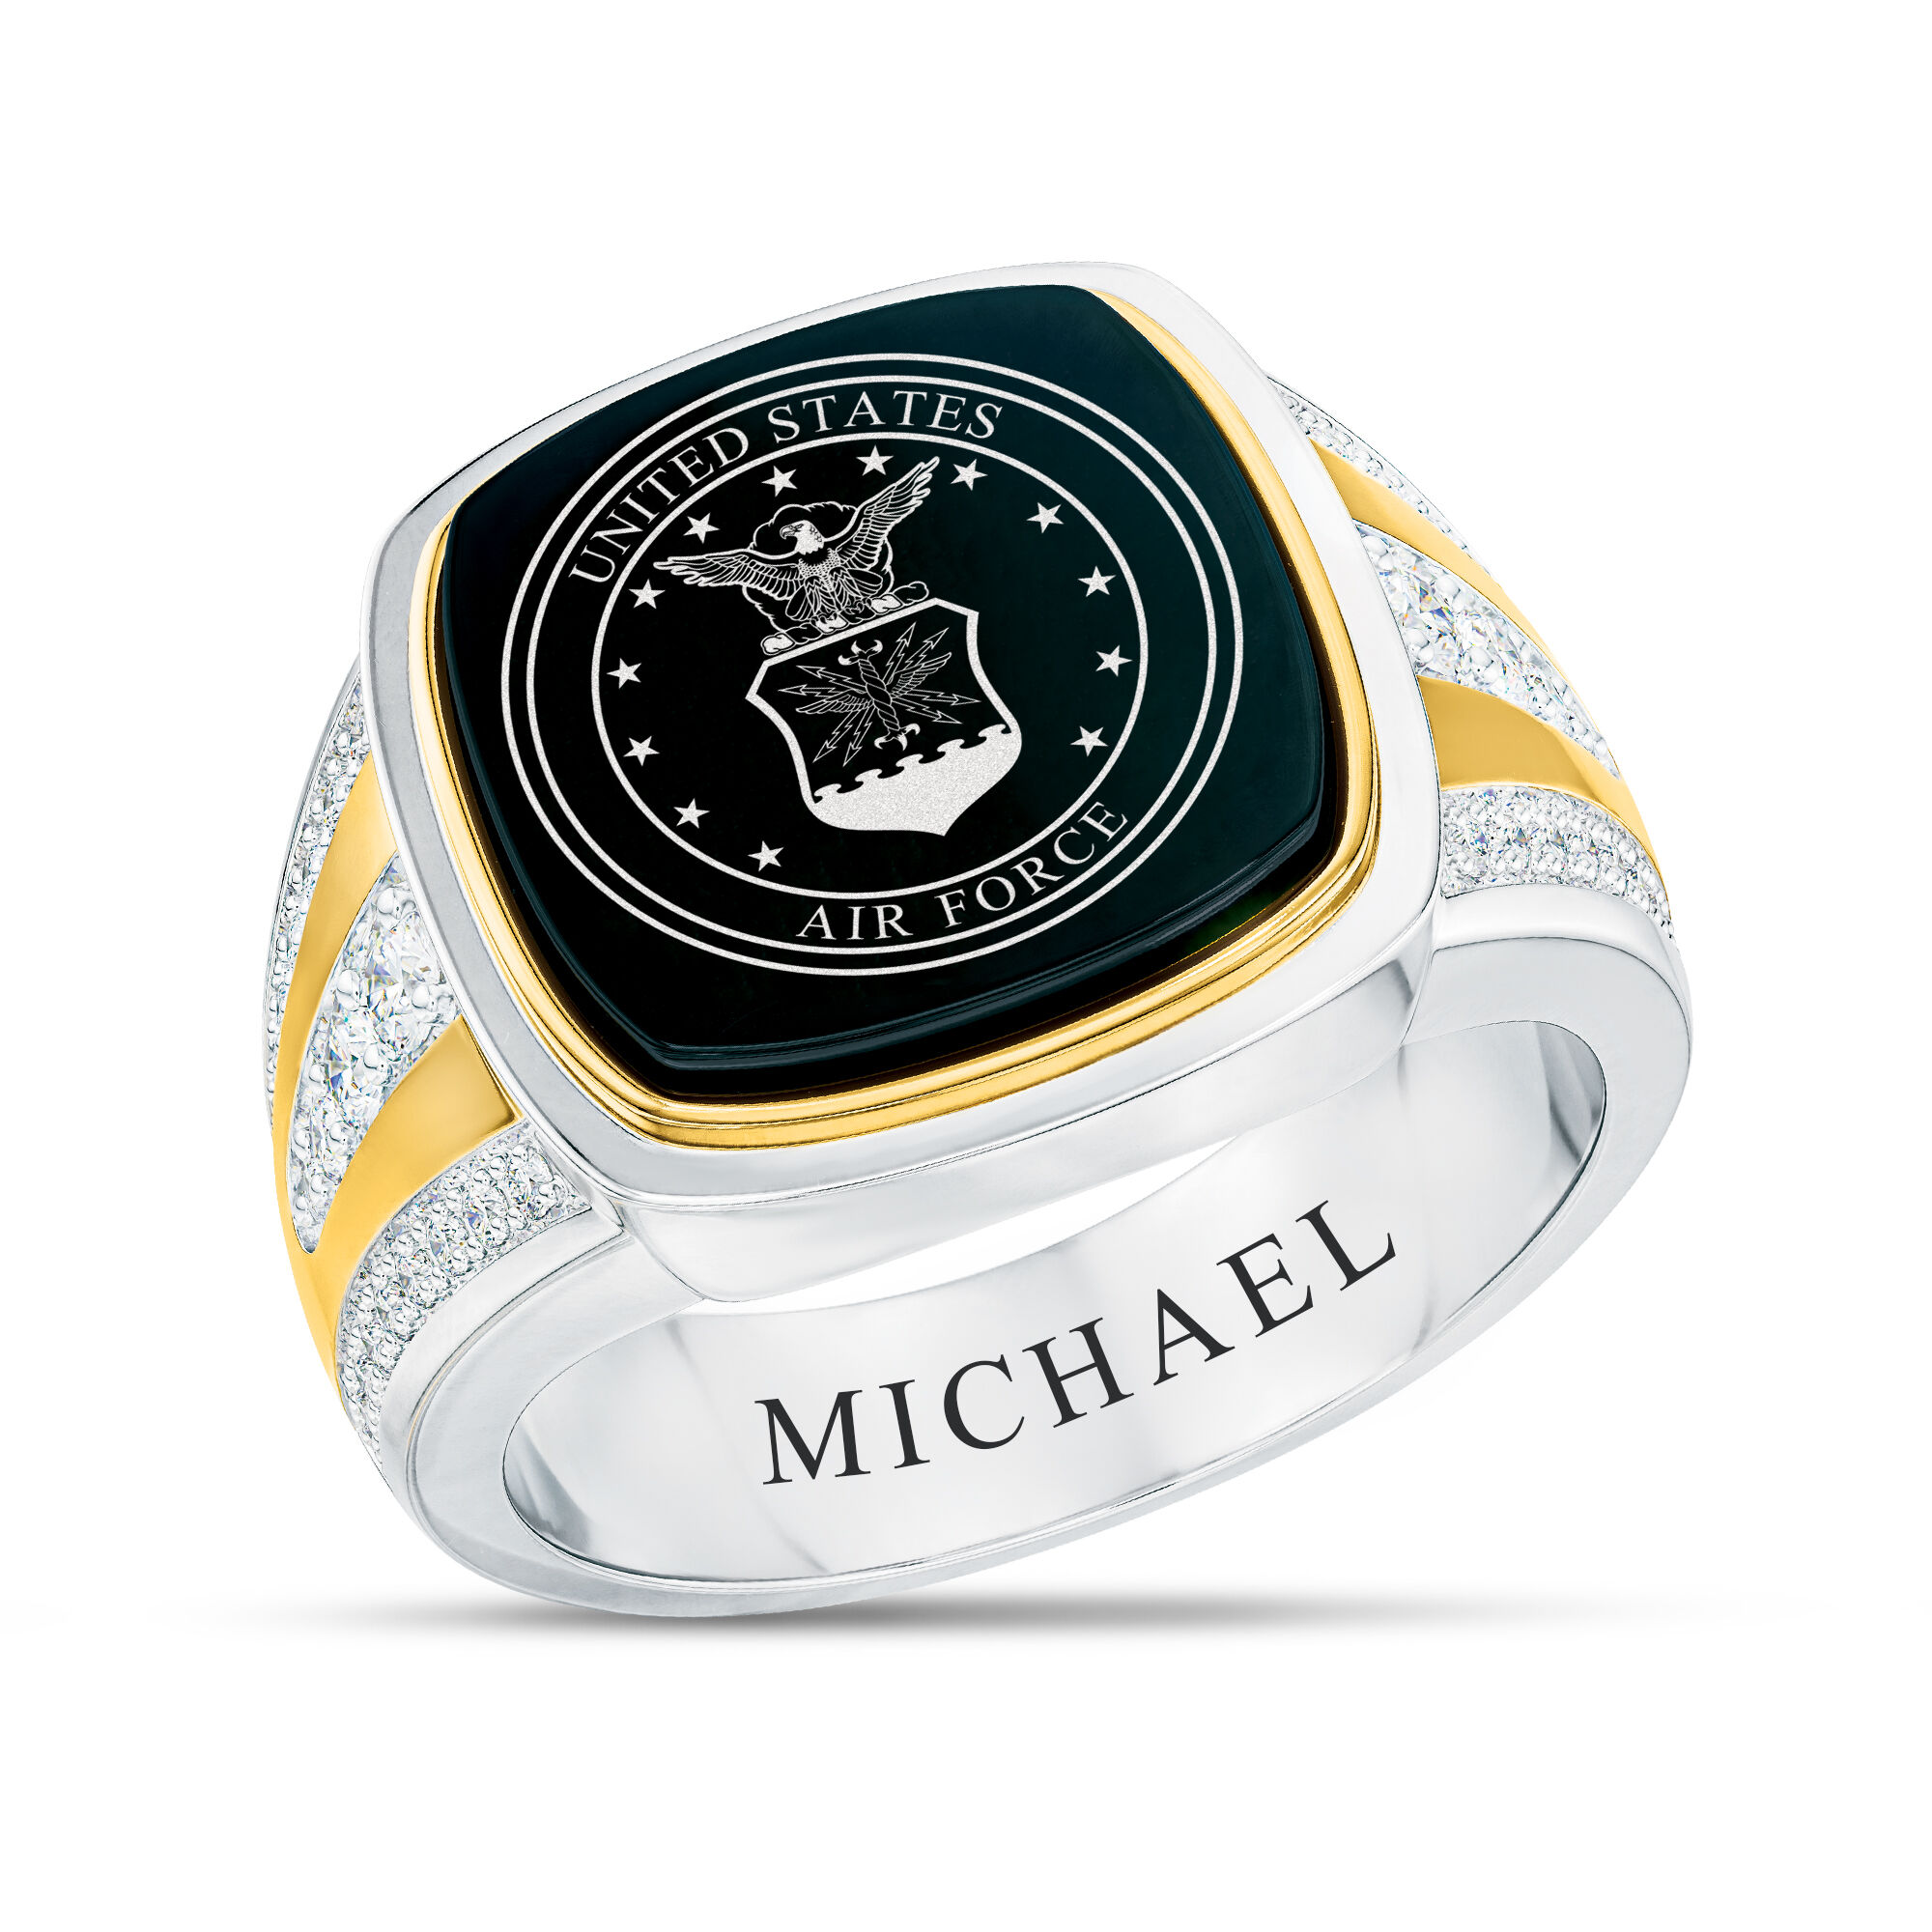 The US Air Force Birthstone Ring 10347 0043 d april